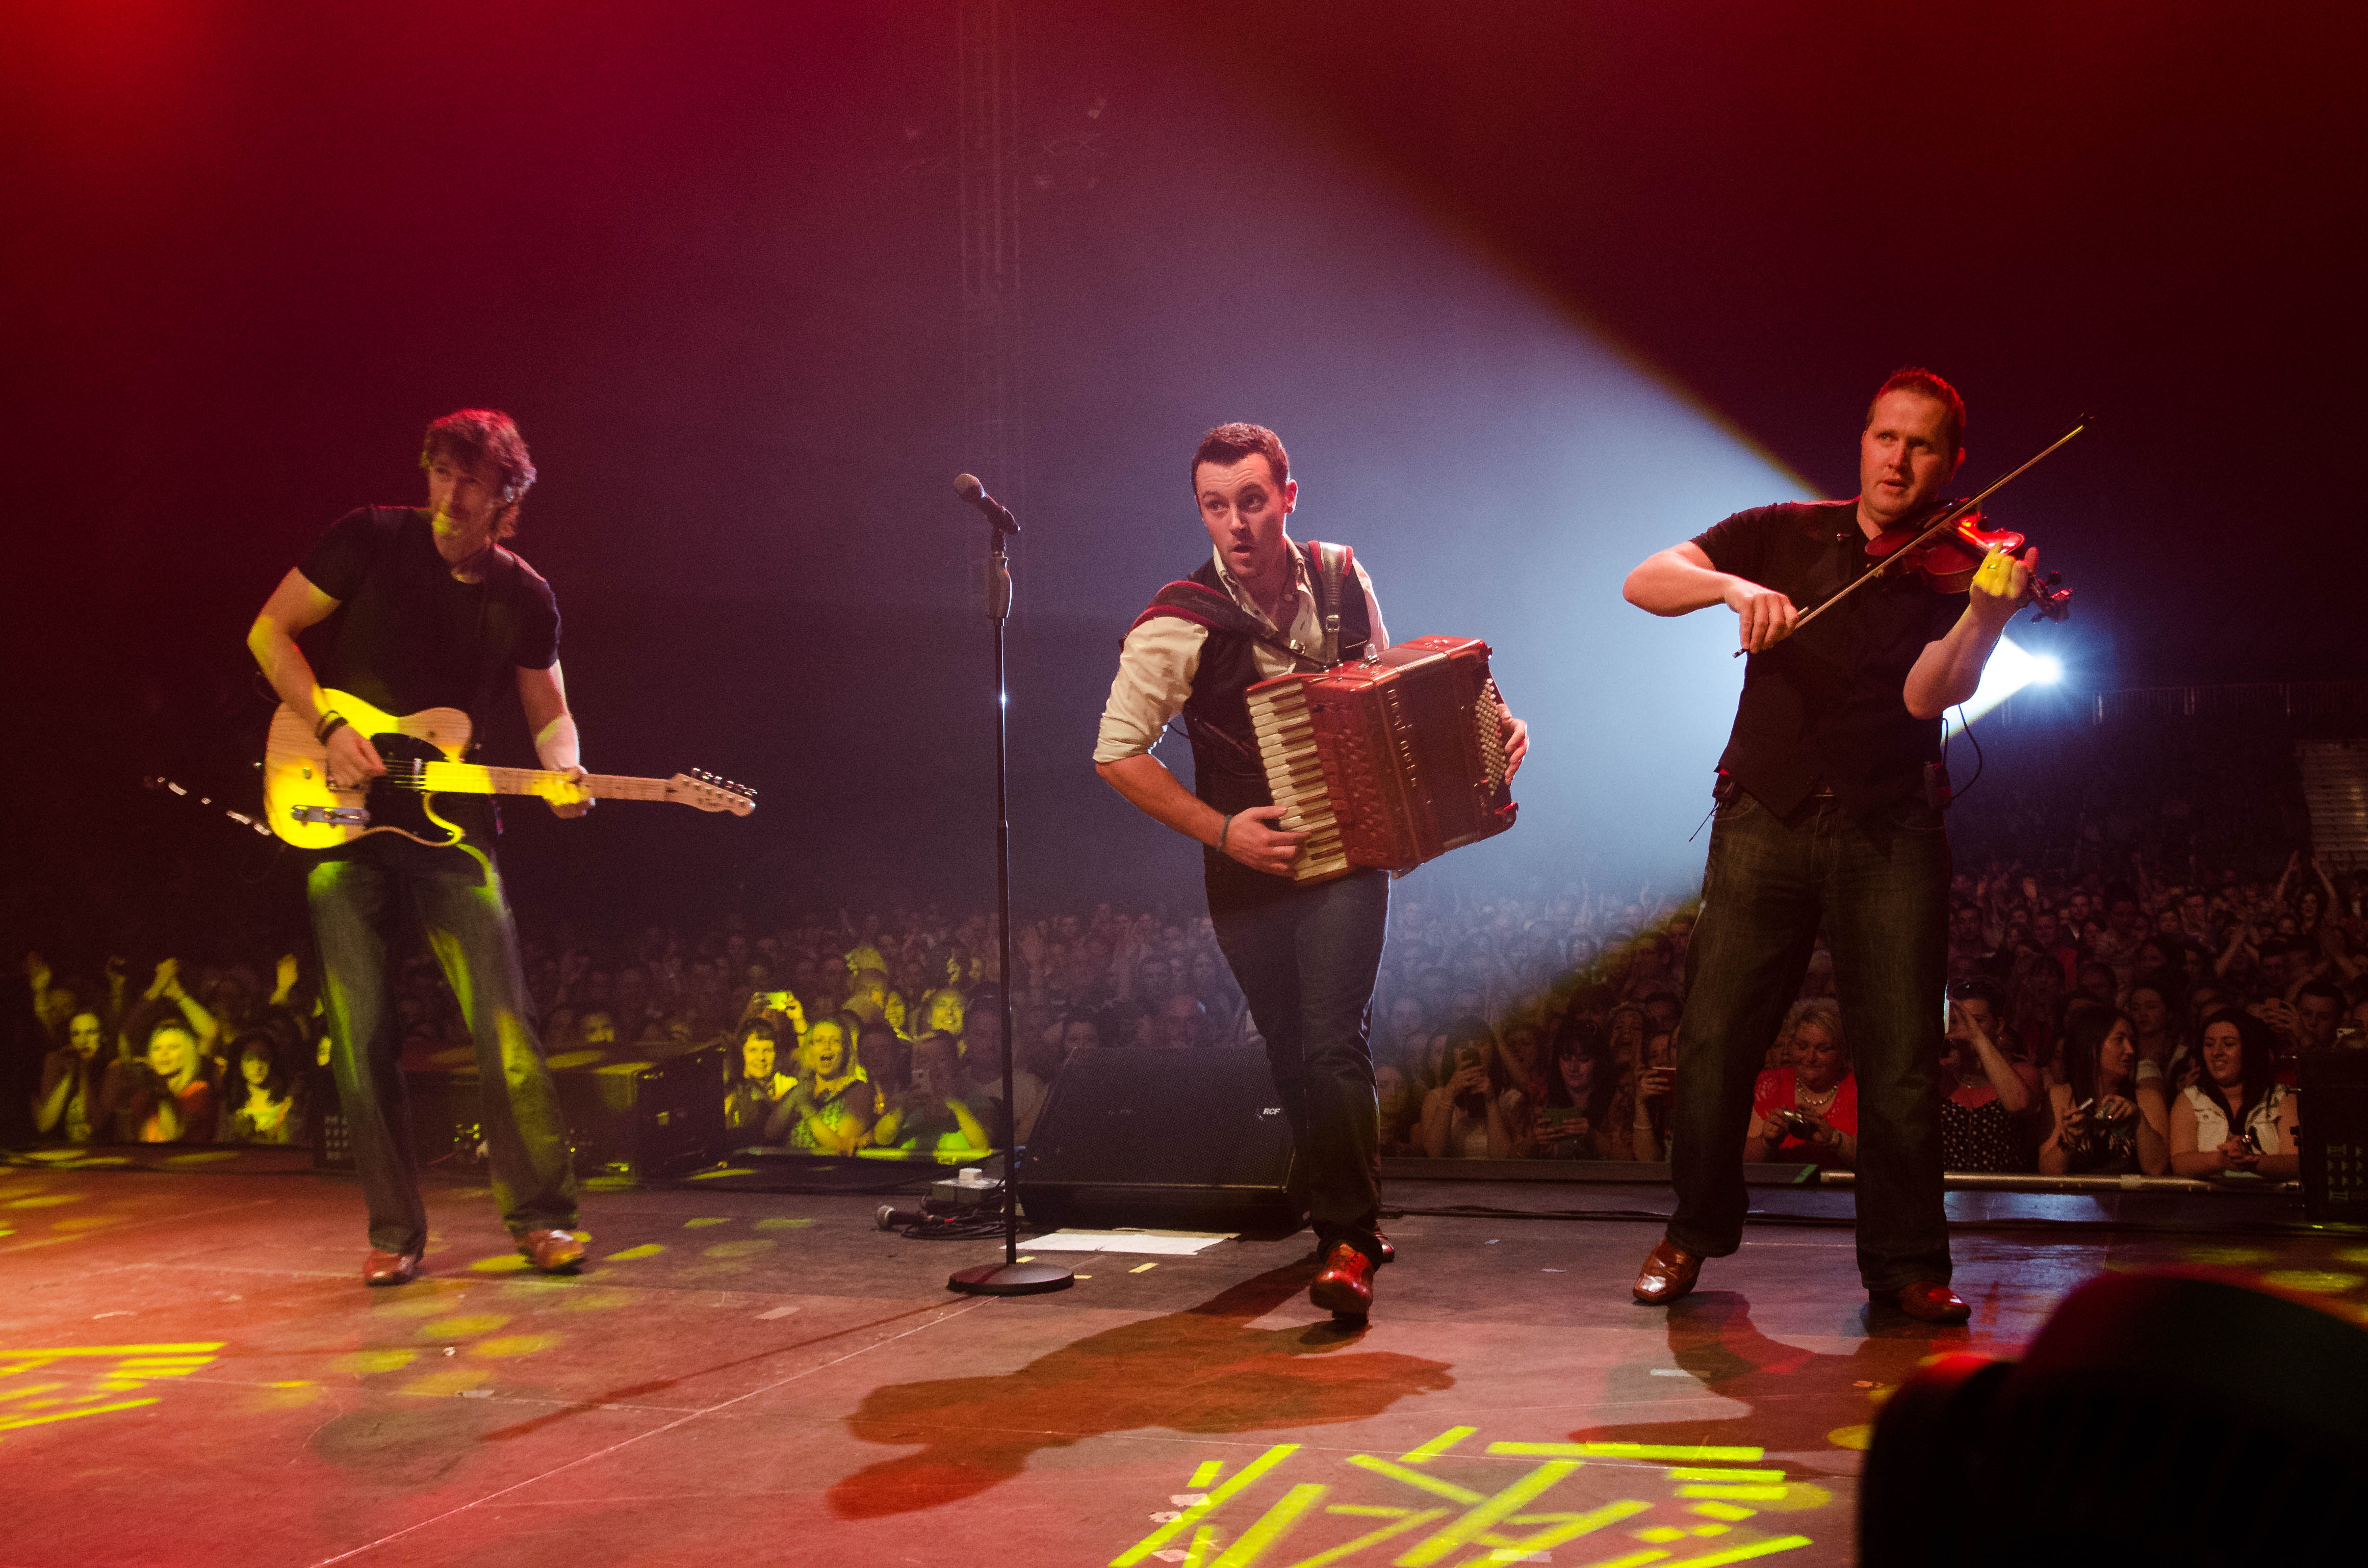 nathan-carter-at-the-marquee-cork-by-sean-smyth-15-6-14-21-of-55